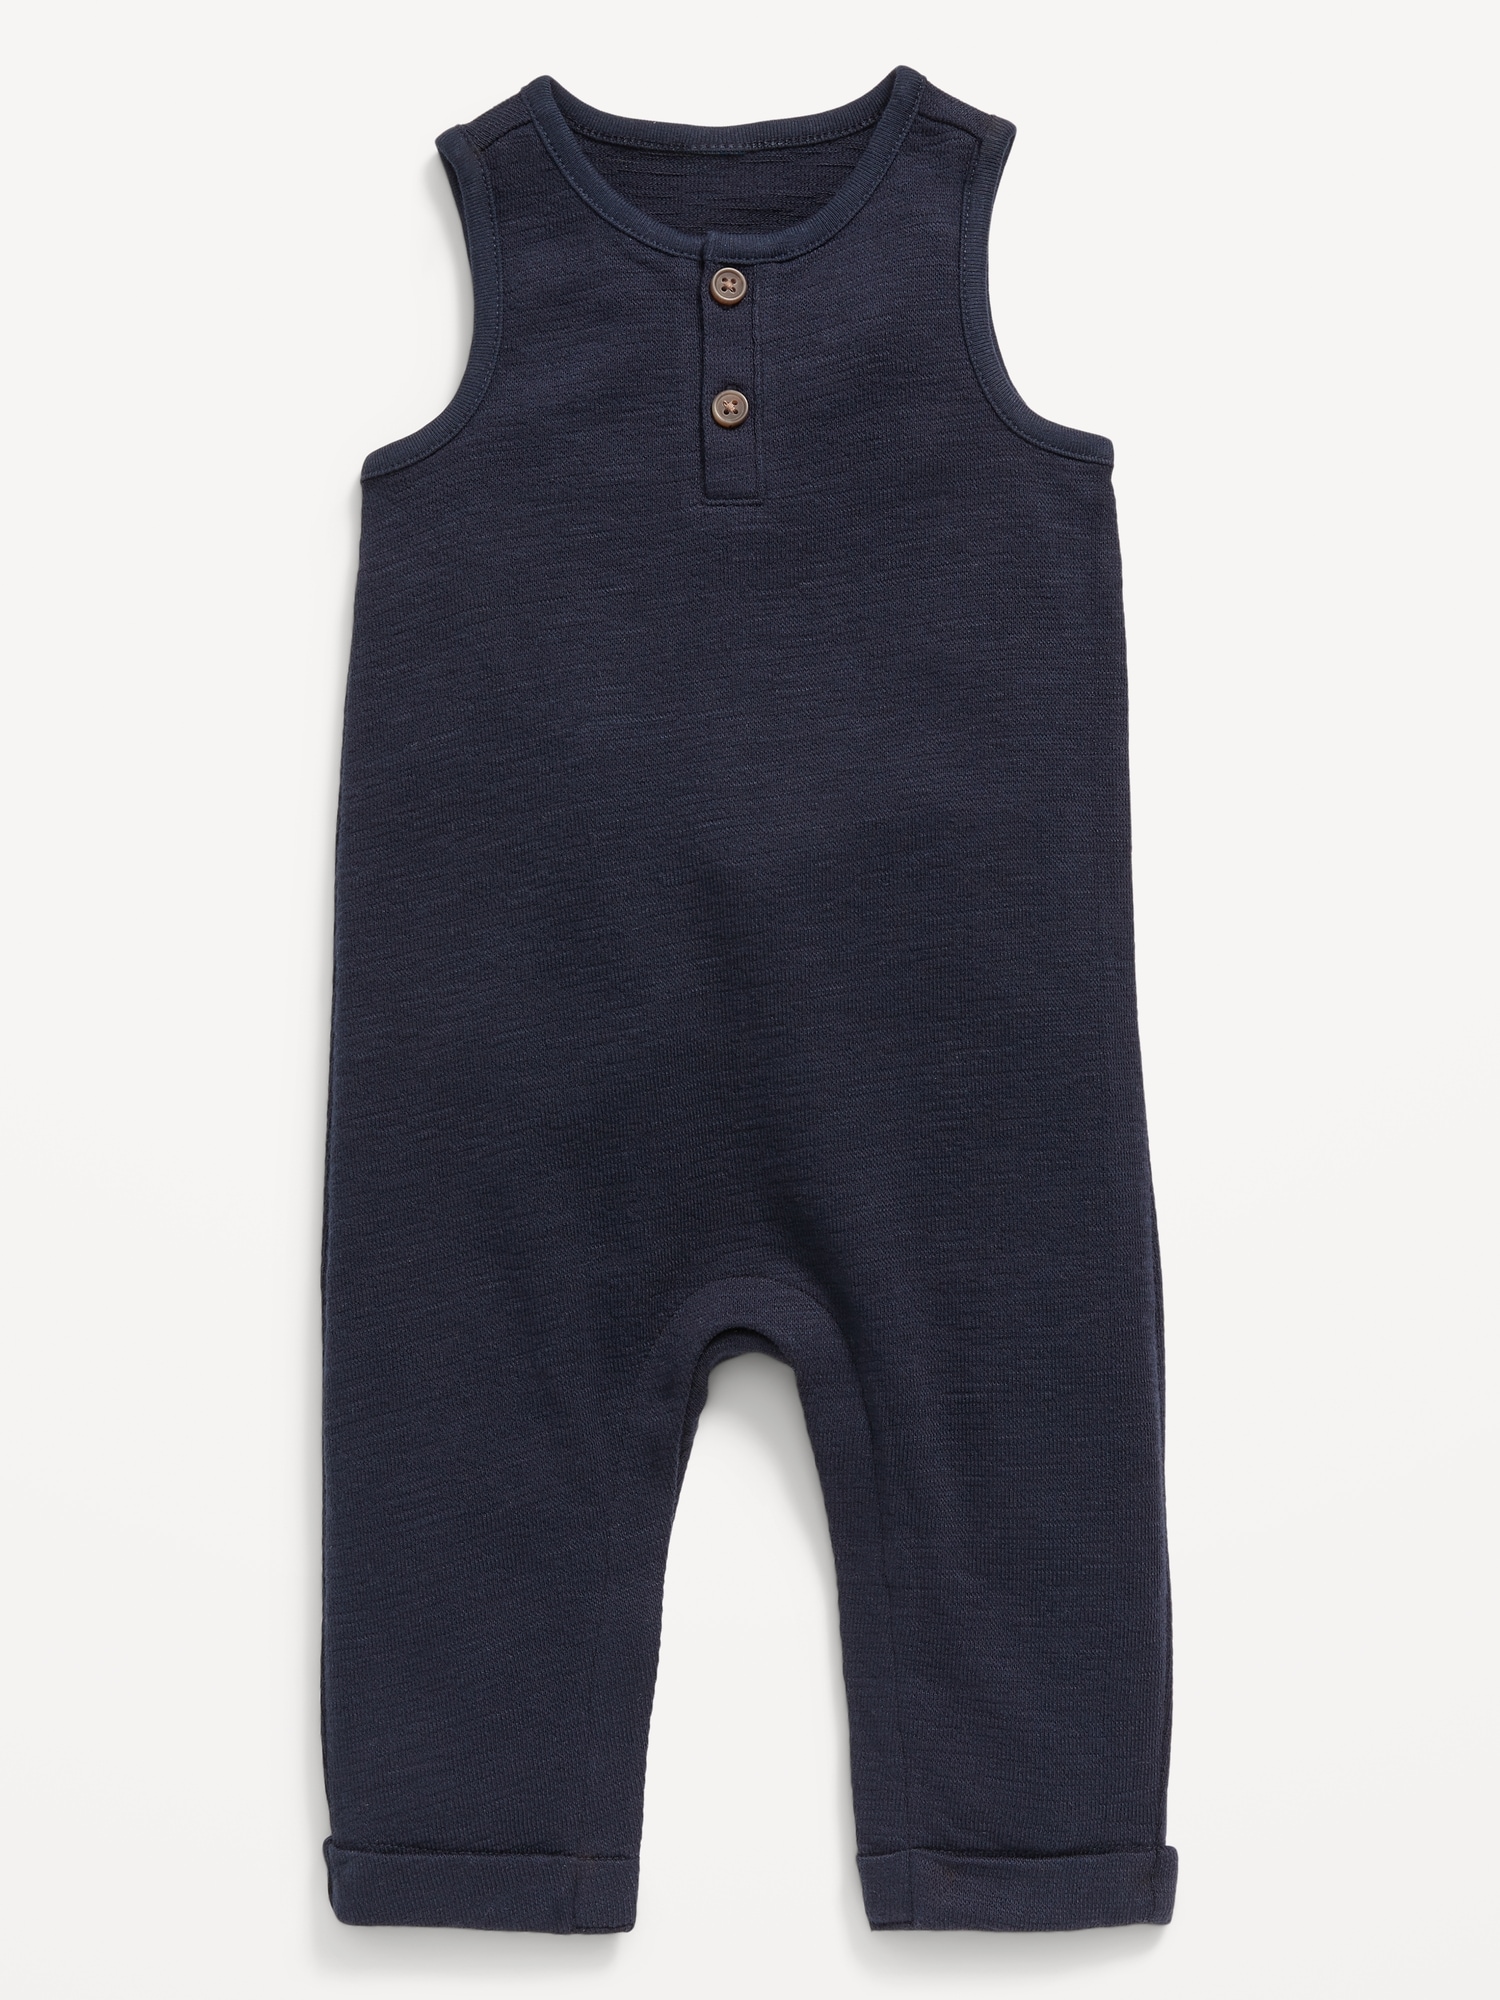 Unisex Sleeveless Thermal-Knit Henley One-Piece for Baby Hot Deal